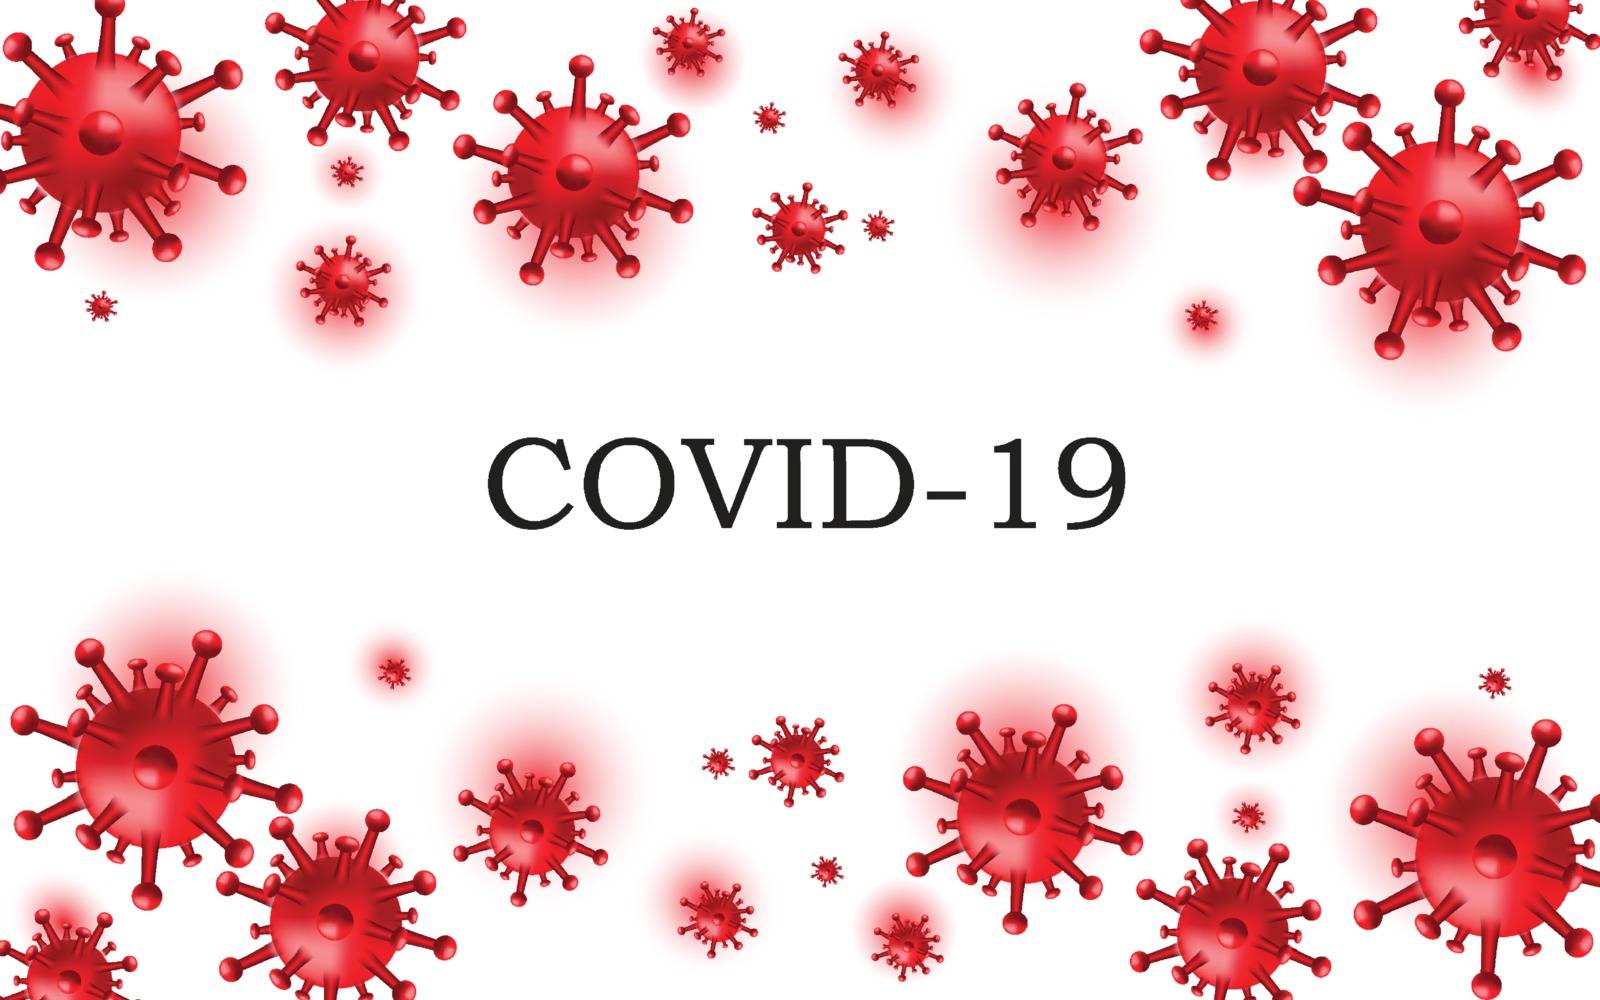 Background with COVID-19 viral disease cell.Covid-19 dangerous virus vector illustration.
Pandemic medical health background with disease cell named COVID-19. 